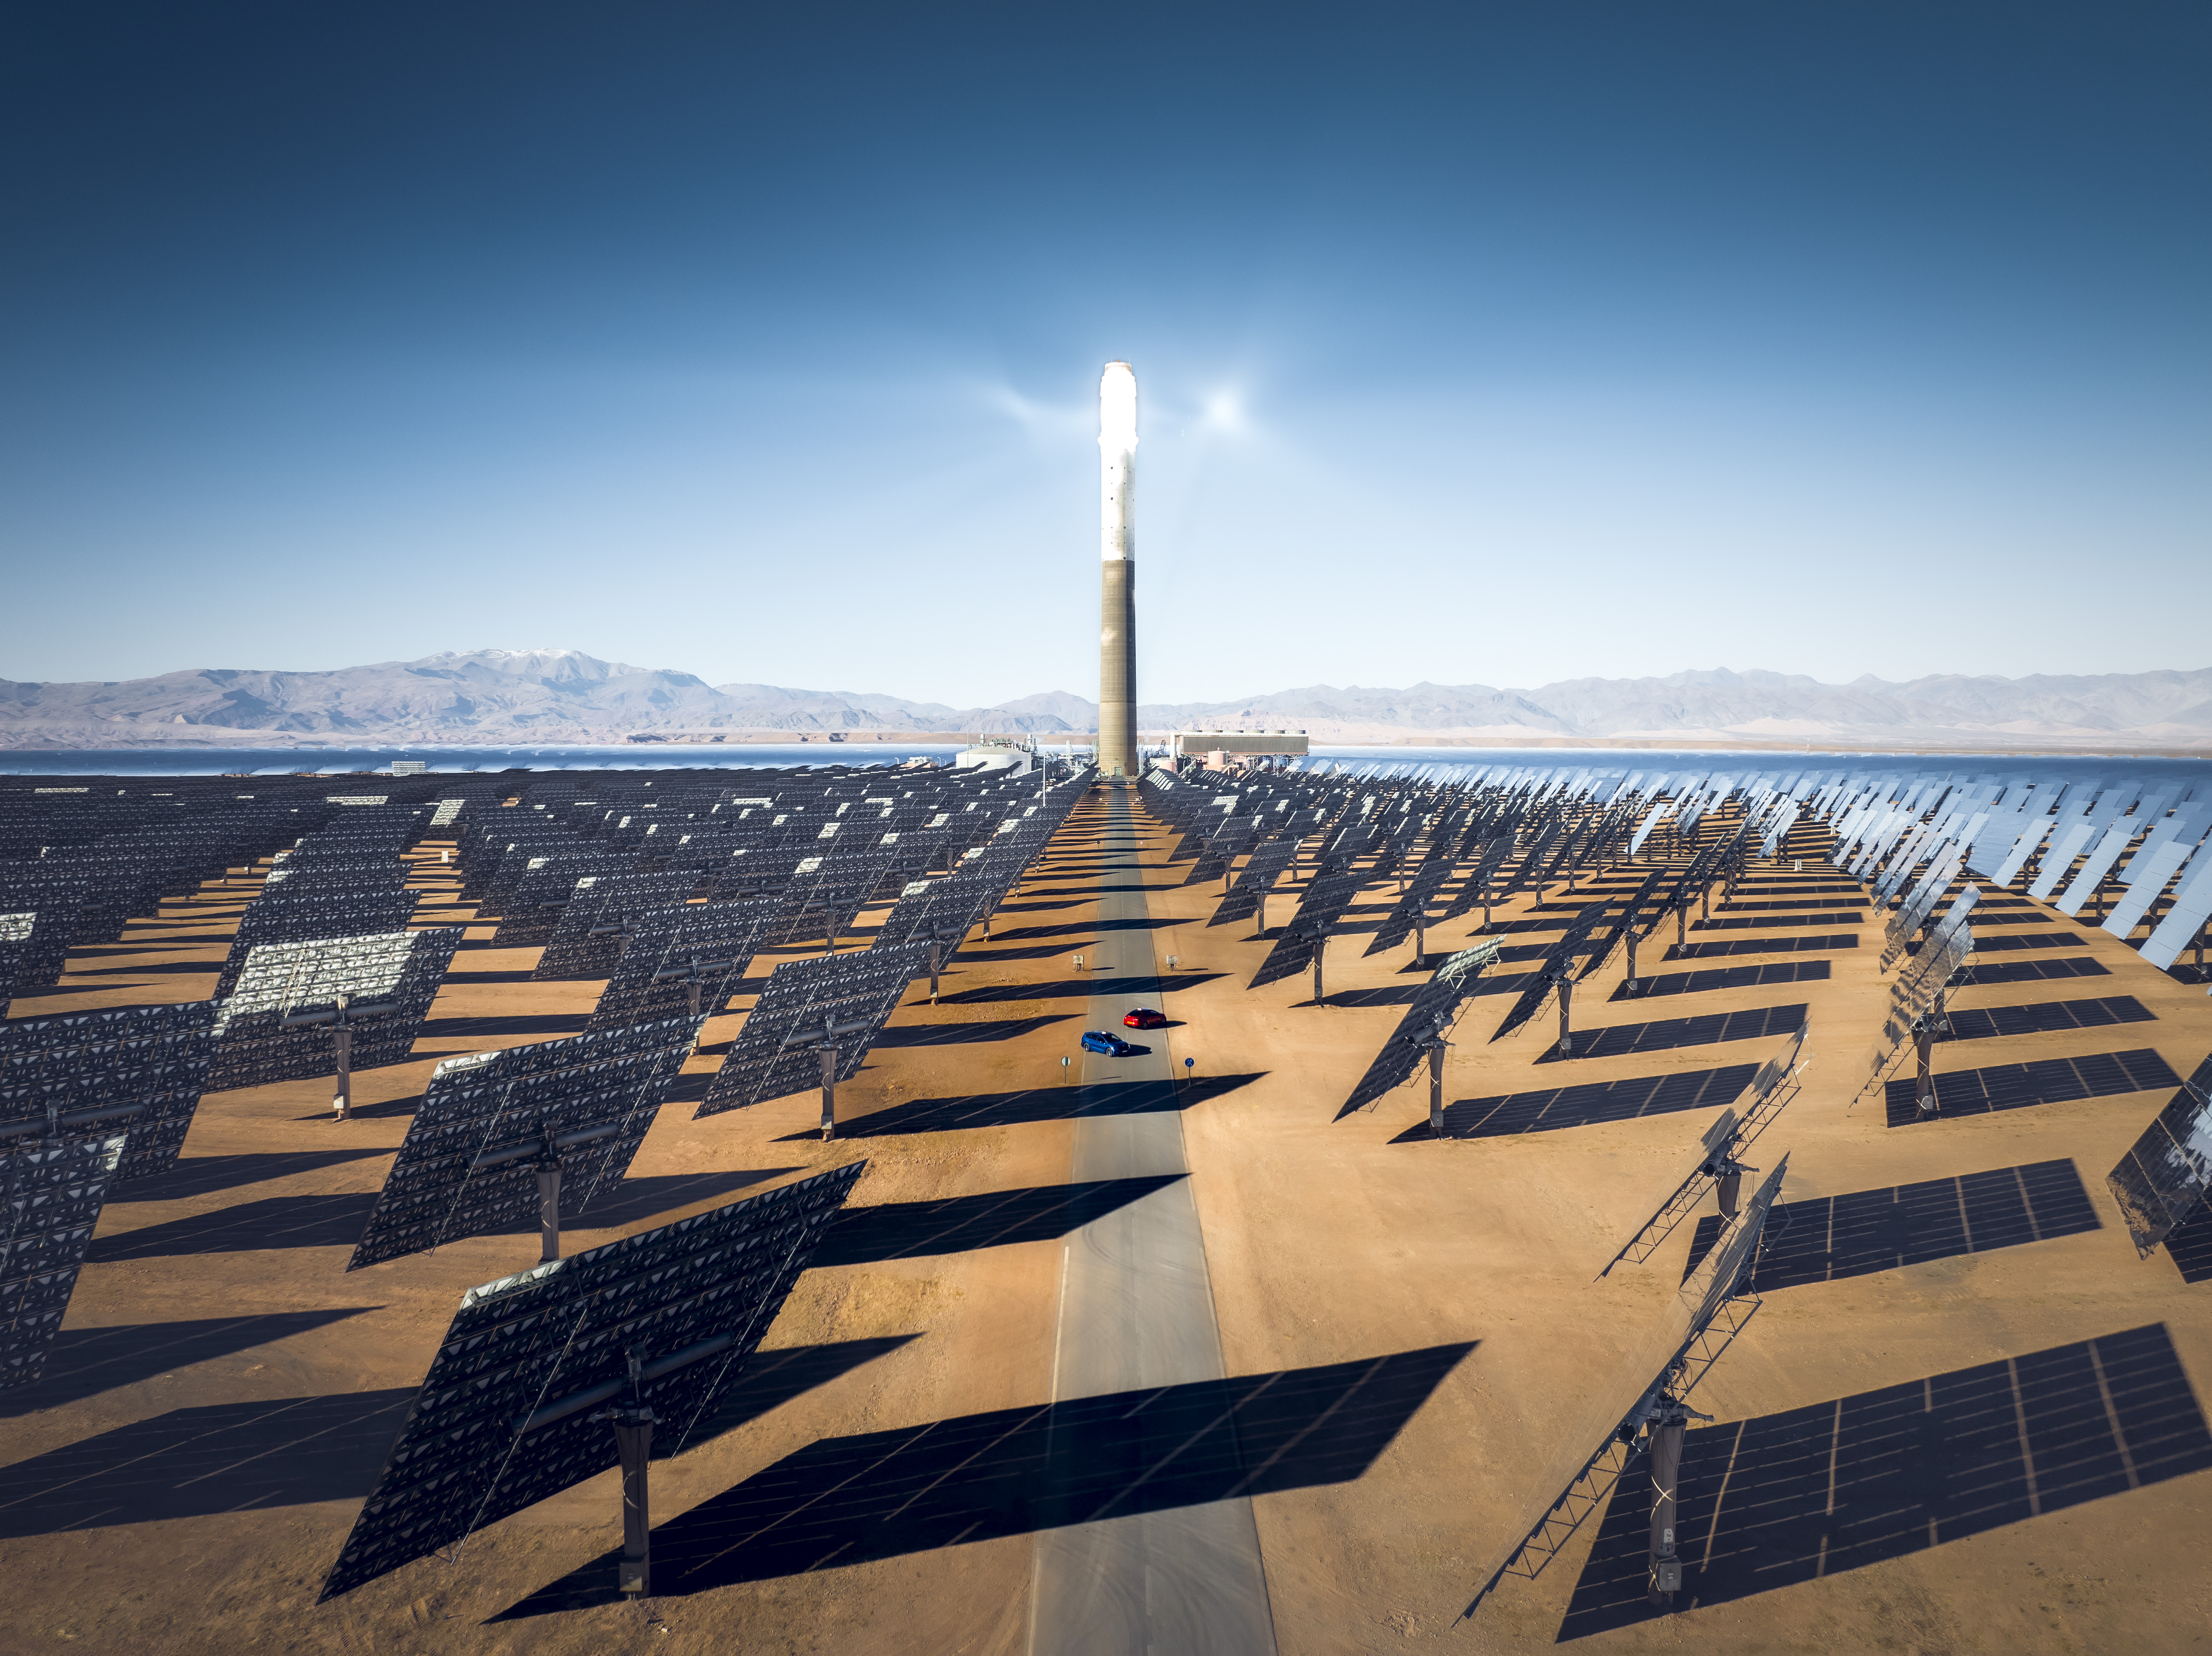 Morocco’s incredible Noor solar power plant covers an area the size of 200 football pitches and is the world’s biggest